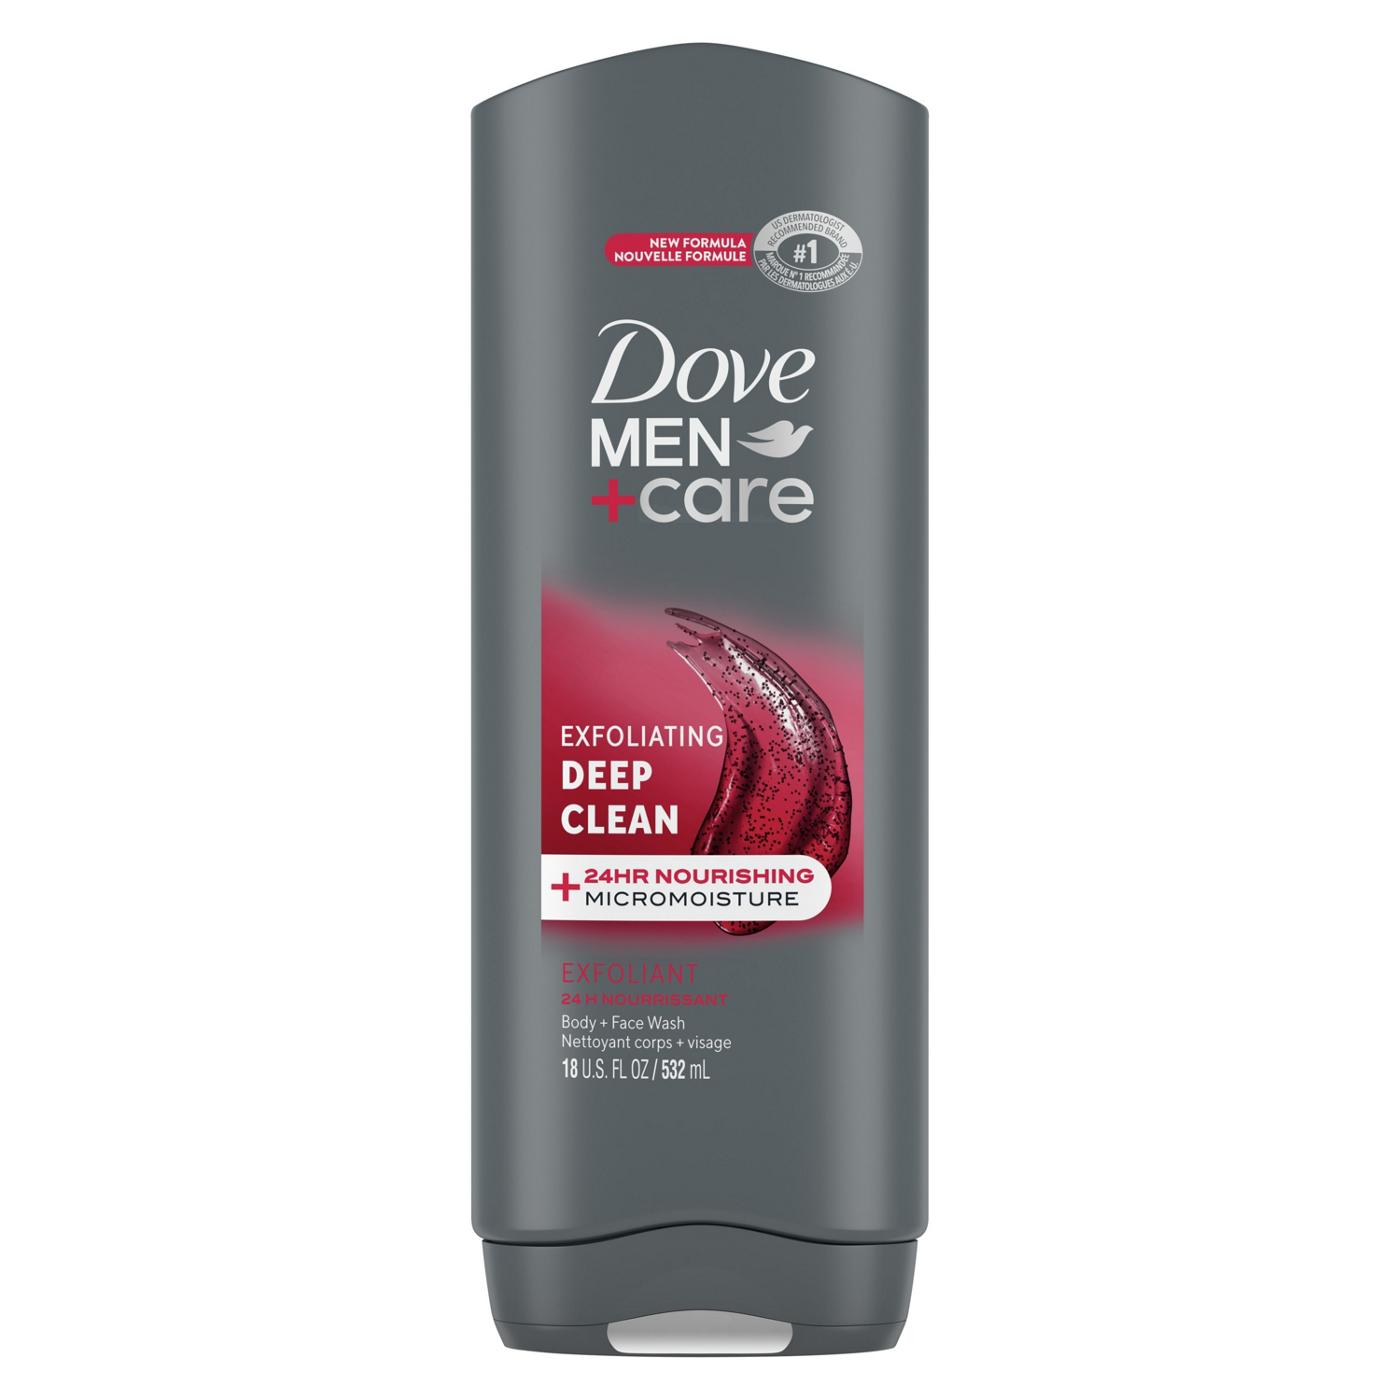 Dove Men+Care Exfoliating Deep Clean Face & Body Wash; image 1 of 3